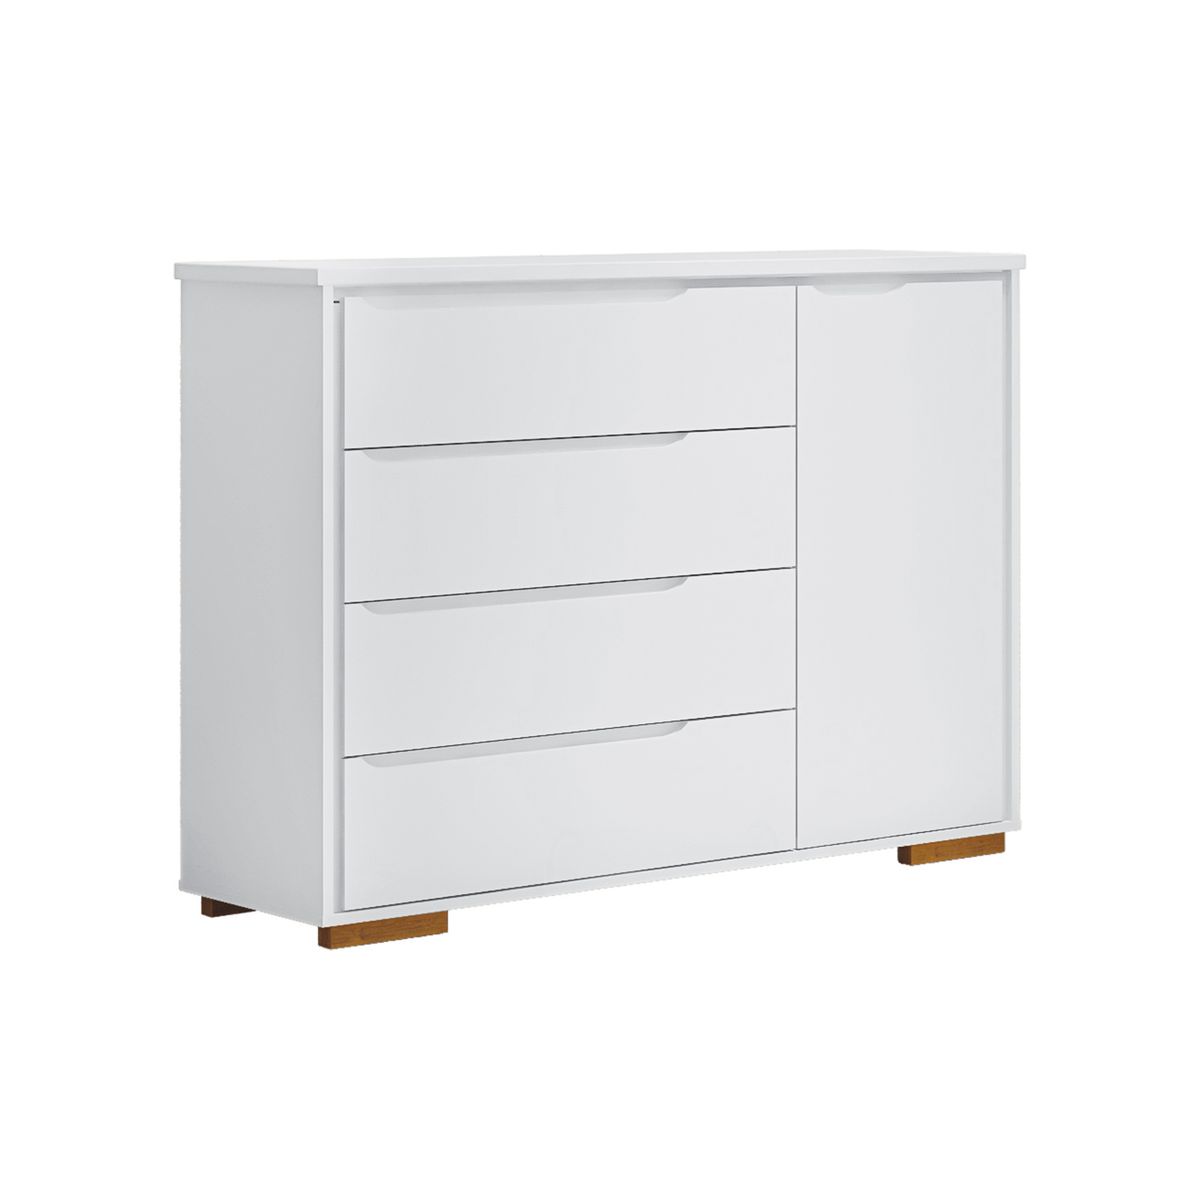 YB Ambiente Sloan Baby Compactum/Chest of Drawers - Flatpack | Shop ...